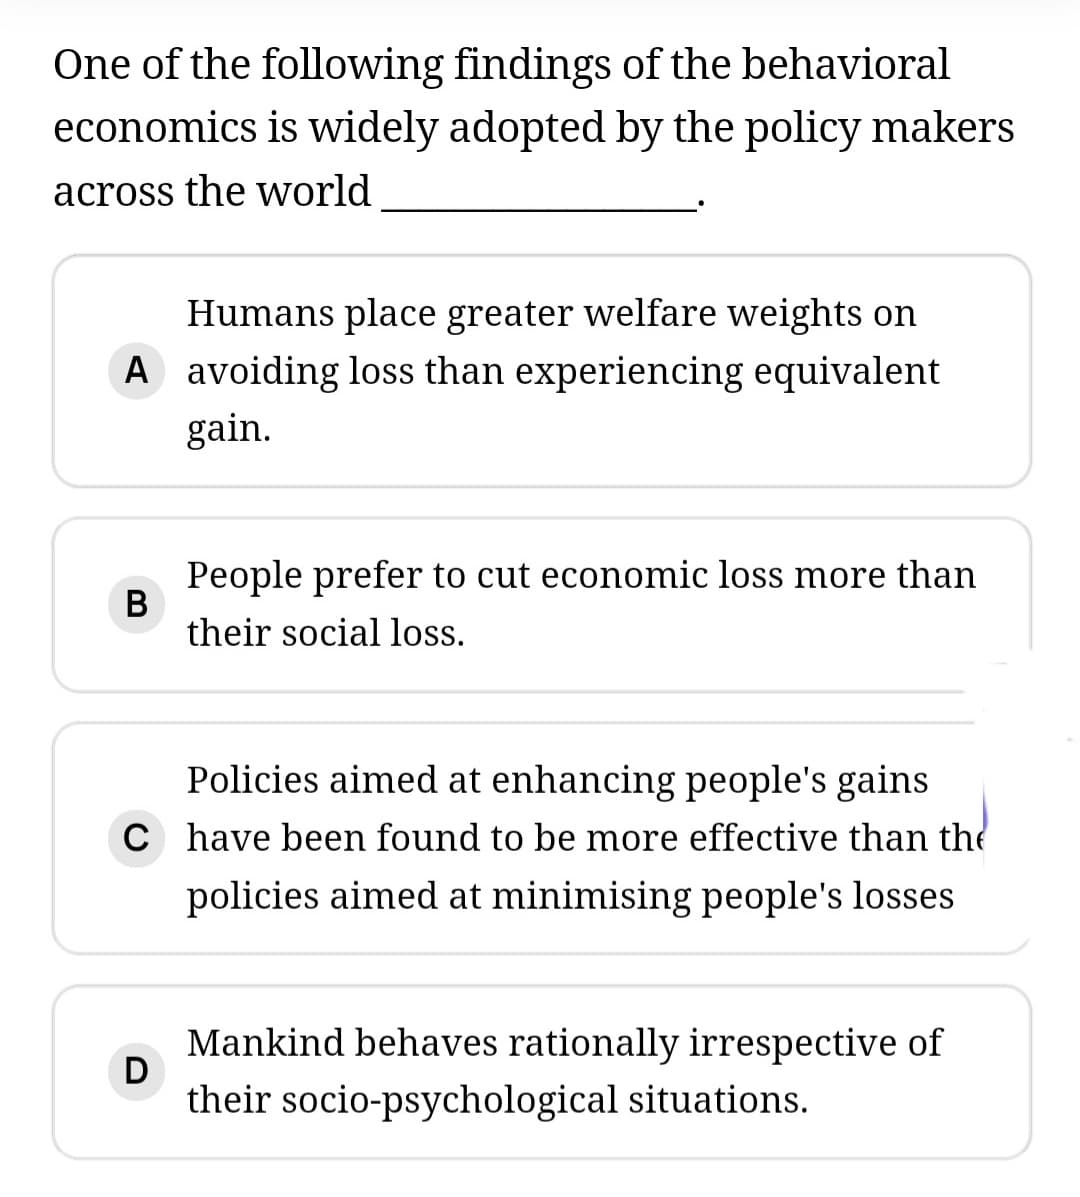 One of the following findings of the behavioral
economics is widely adopted by the policy makers
across the world
Humans place greater welfare weights on
A avoiding loss than experiencing equivalent
gain.
People prefer to cut economic loss more than
their social loss.
Policies aimed at enhancing people's gains
C have been found to be more effective than the
policies aimed at minimising people's losses
Mankind behaves rationally irrespective of
D
their socio-psychological situations.
